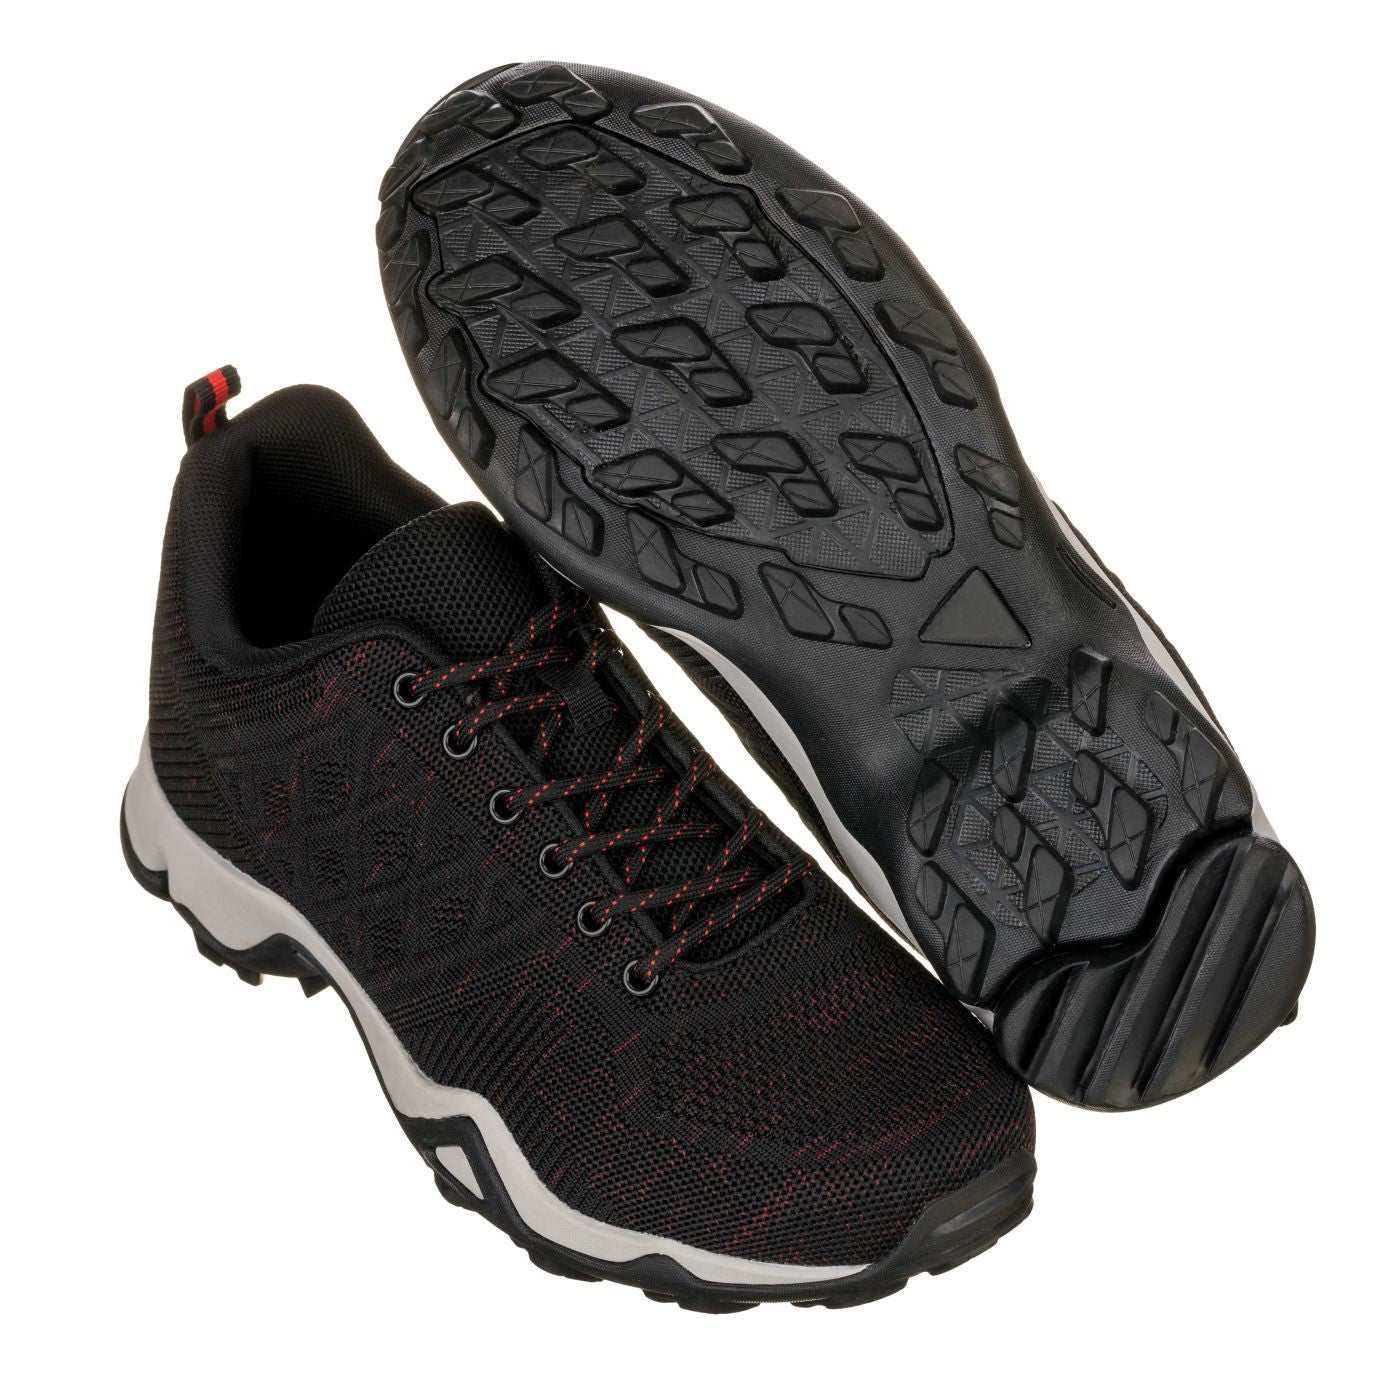 Elevator shoes height increase CALTO - Q103 - 2.4 Inches Taller (Black/Red) - Super Lightweight